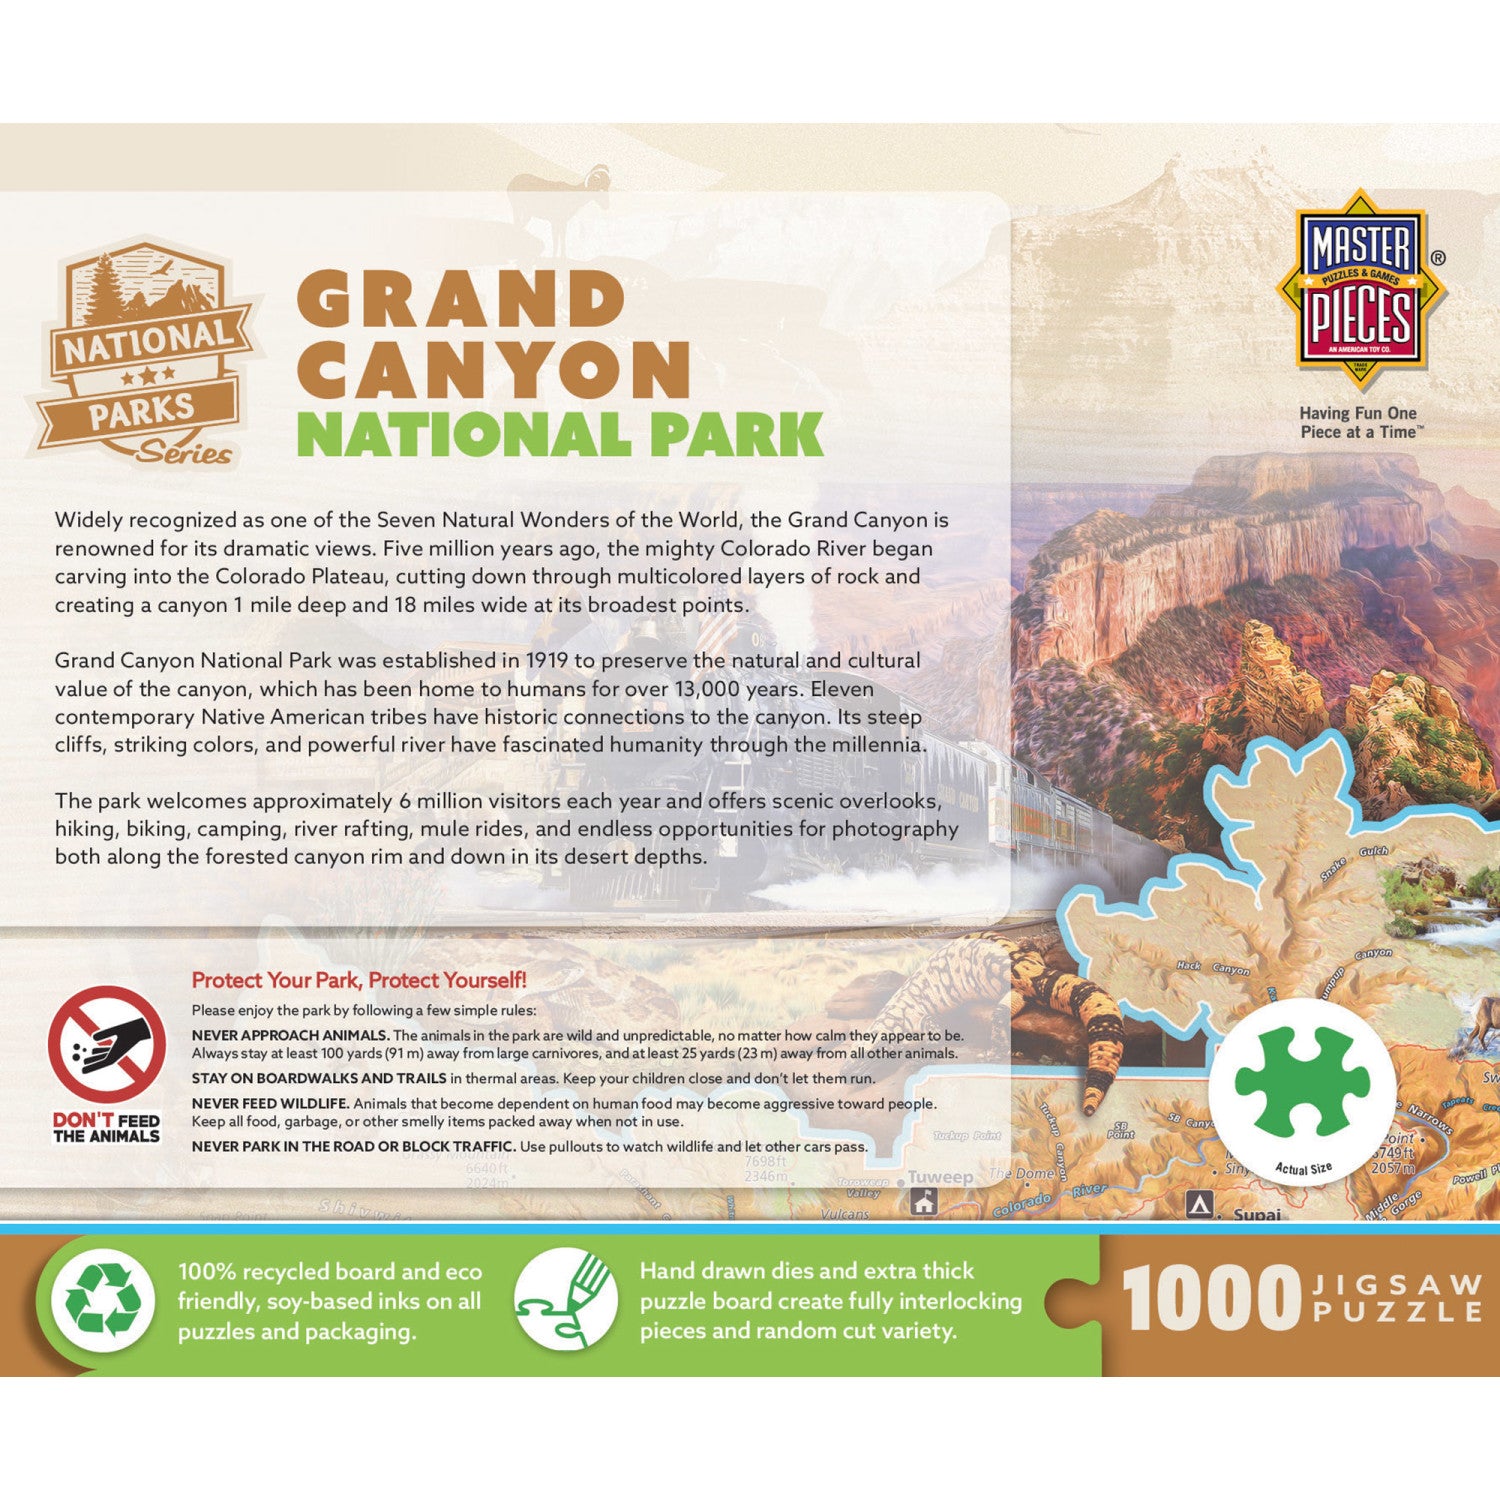 Grand Canyon National Park 1000 Piece Jigsaw Puzzle